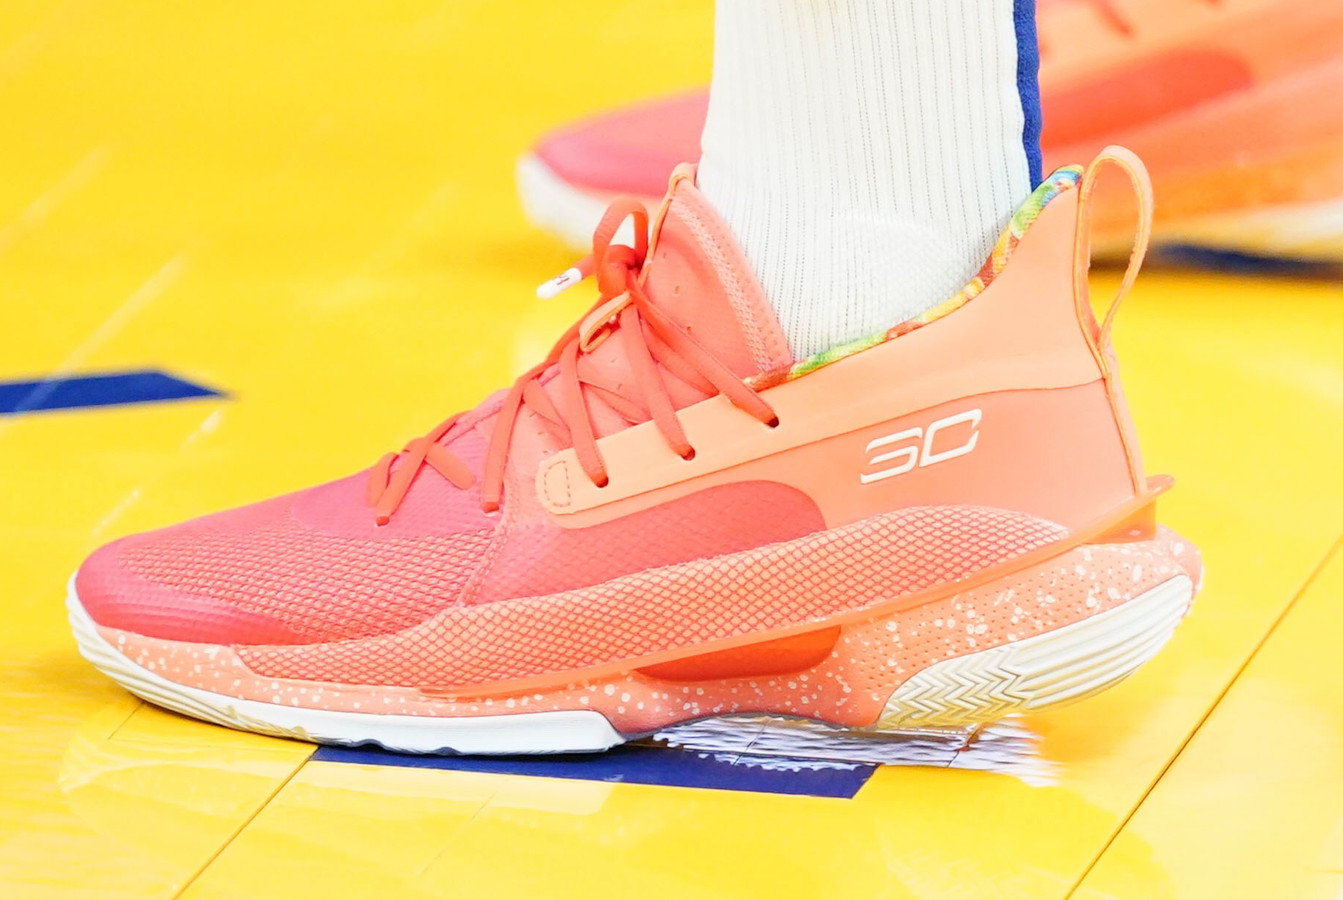 Stephen Curry, Under Armour